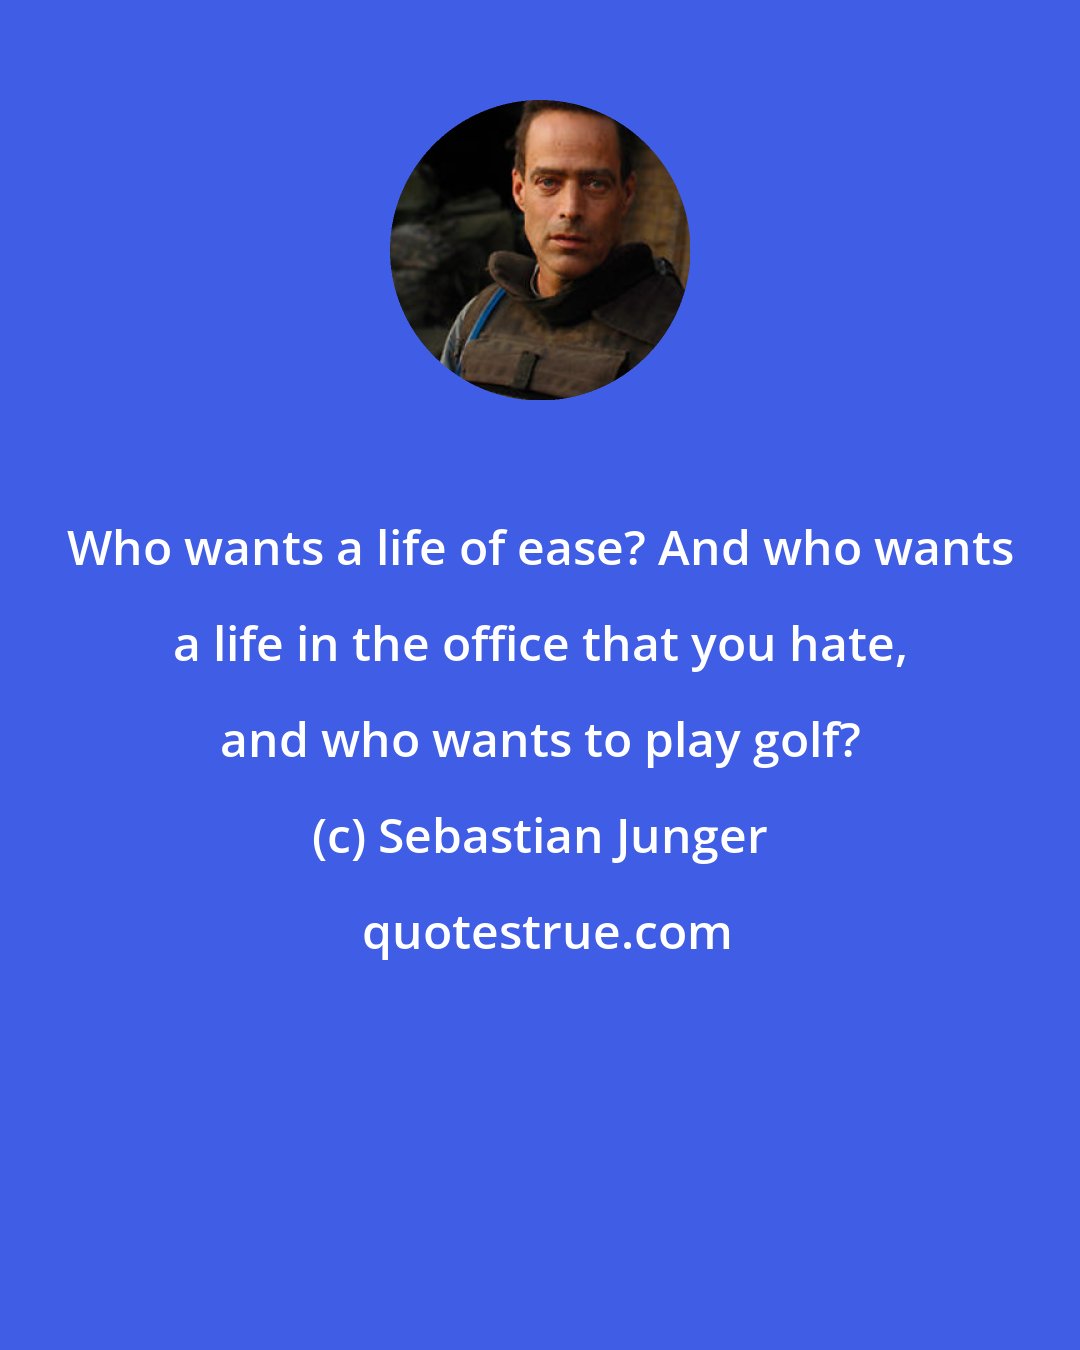 Sebastian Junger: Who wants a life of ease? And who wants a life in the office that you hate, and who wants to play golf?